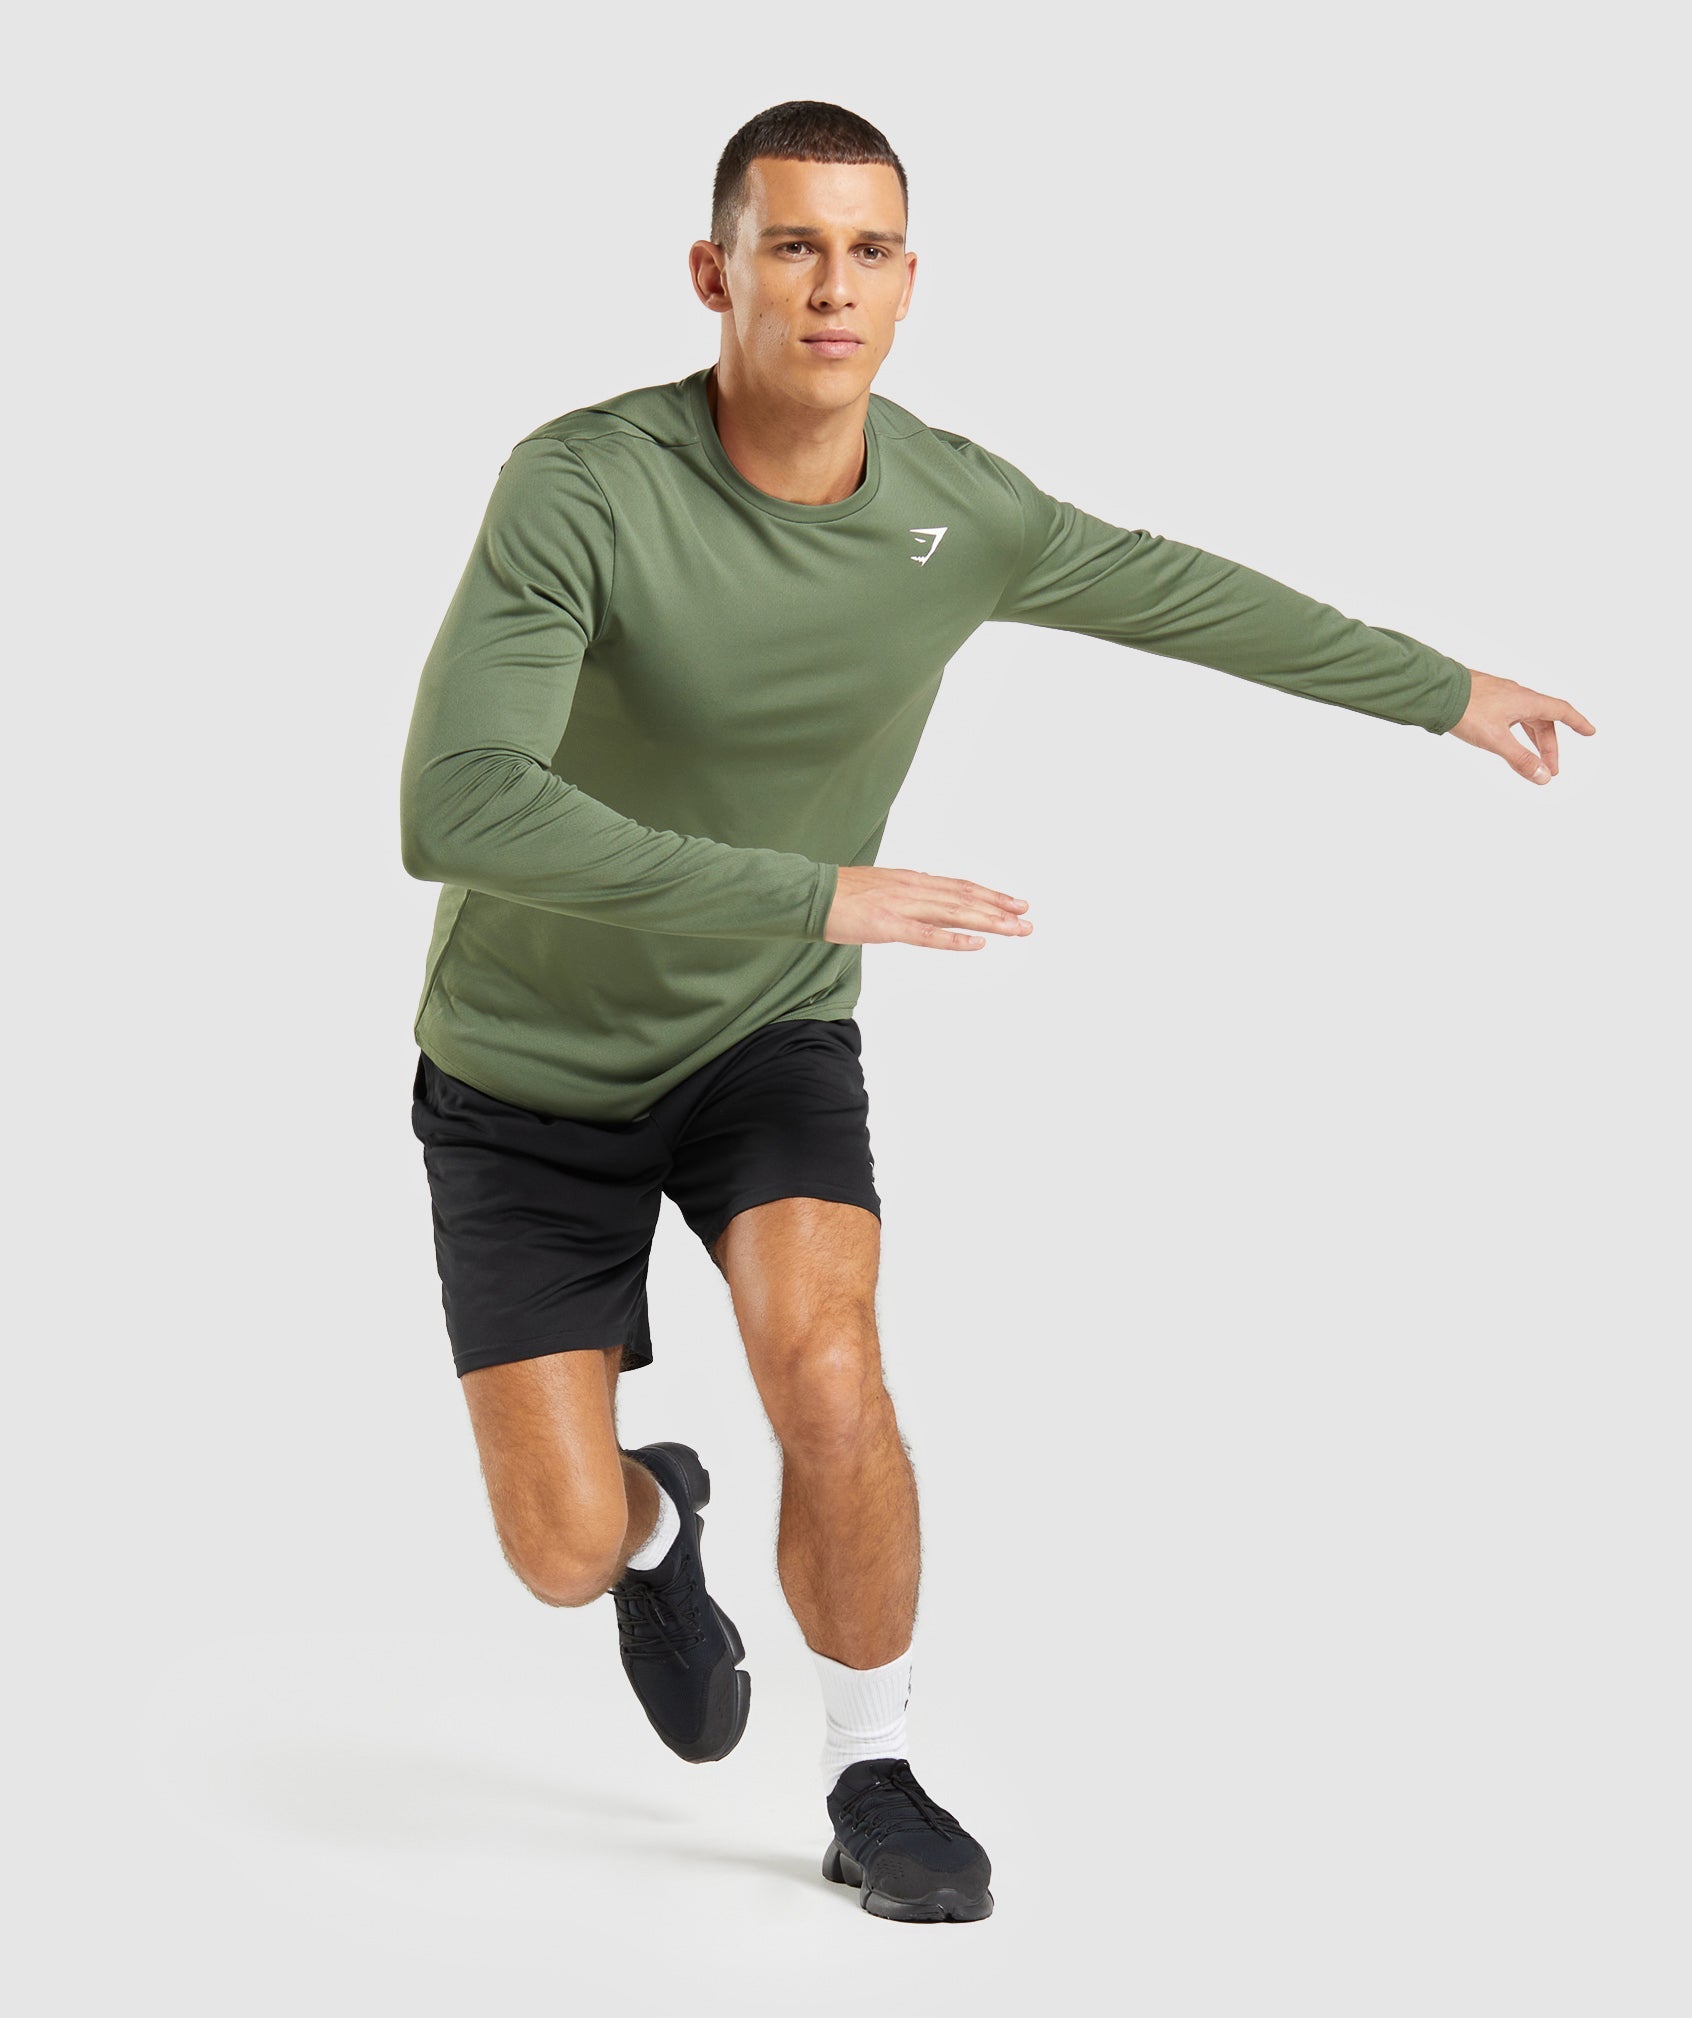 Arrival Long Sleeve T-Shirt in Core Olive - view 4